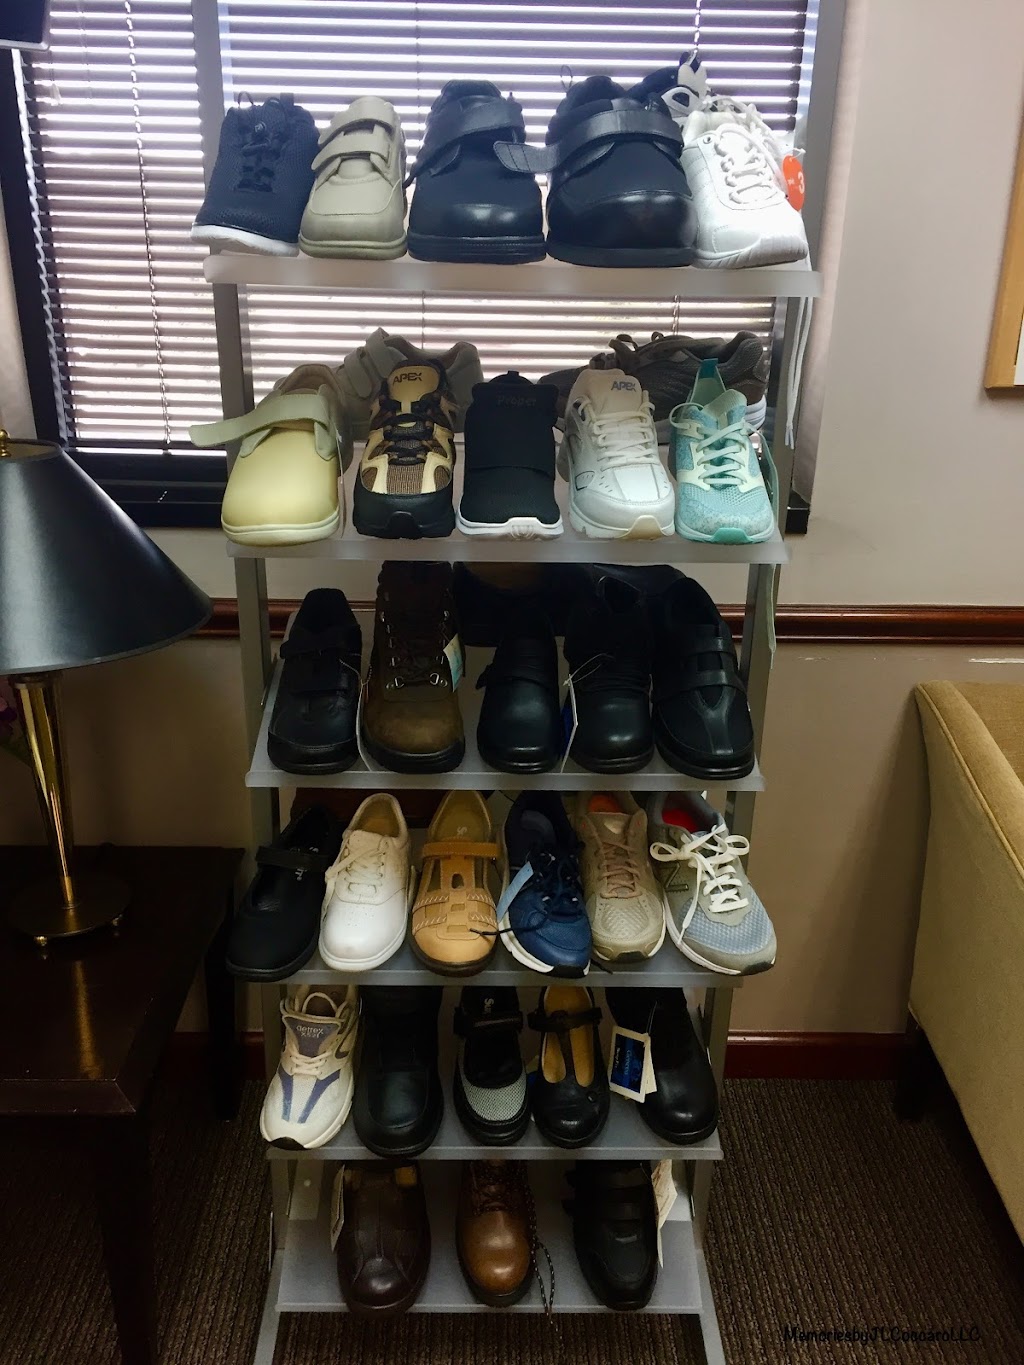 Edison Foot and Ankle Care, P.C. | 1037 Amboy Ave, Edison, NJ 08837 | Phone: (732) 494-5601